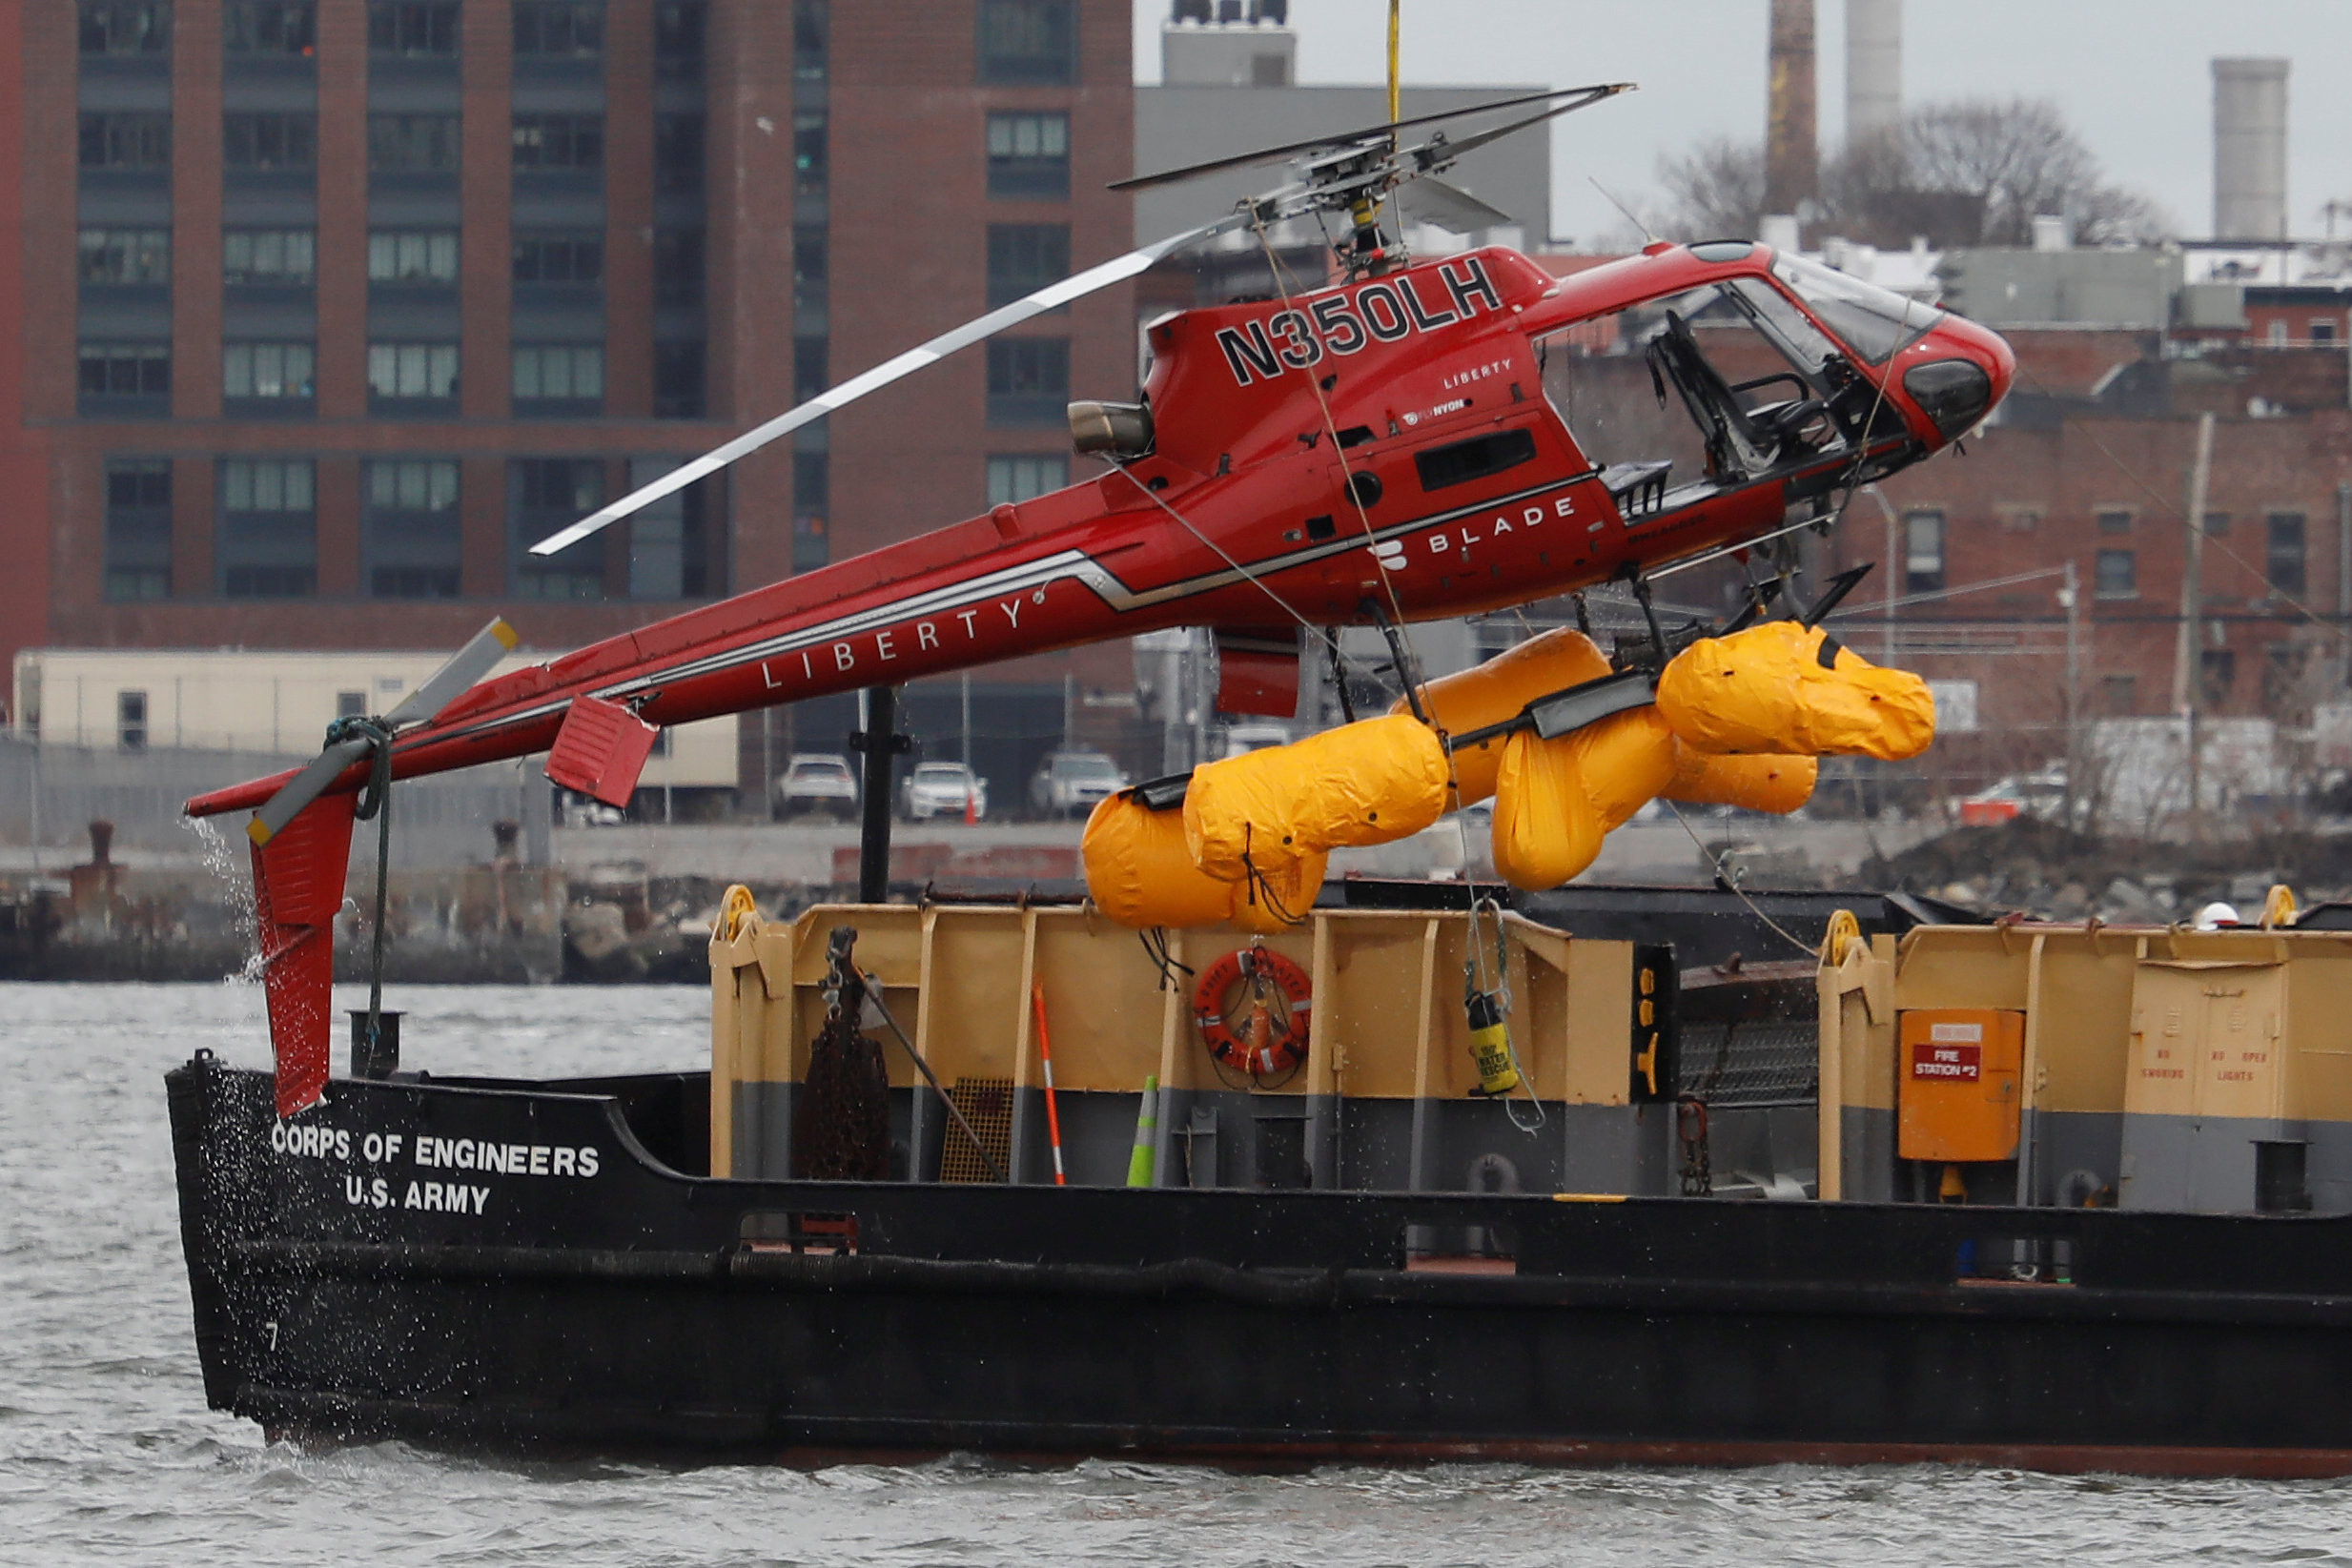 PHOTO: The wreckage of a chartered Liberty Helicopters helicopter that crashed into the East River is hoisted from the water in New York, March 12, 2018.